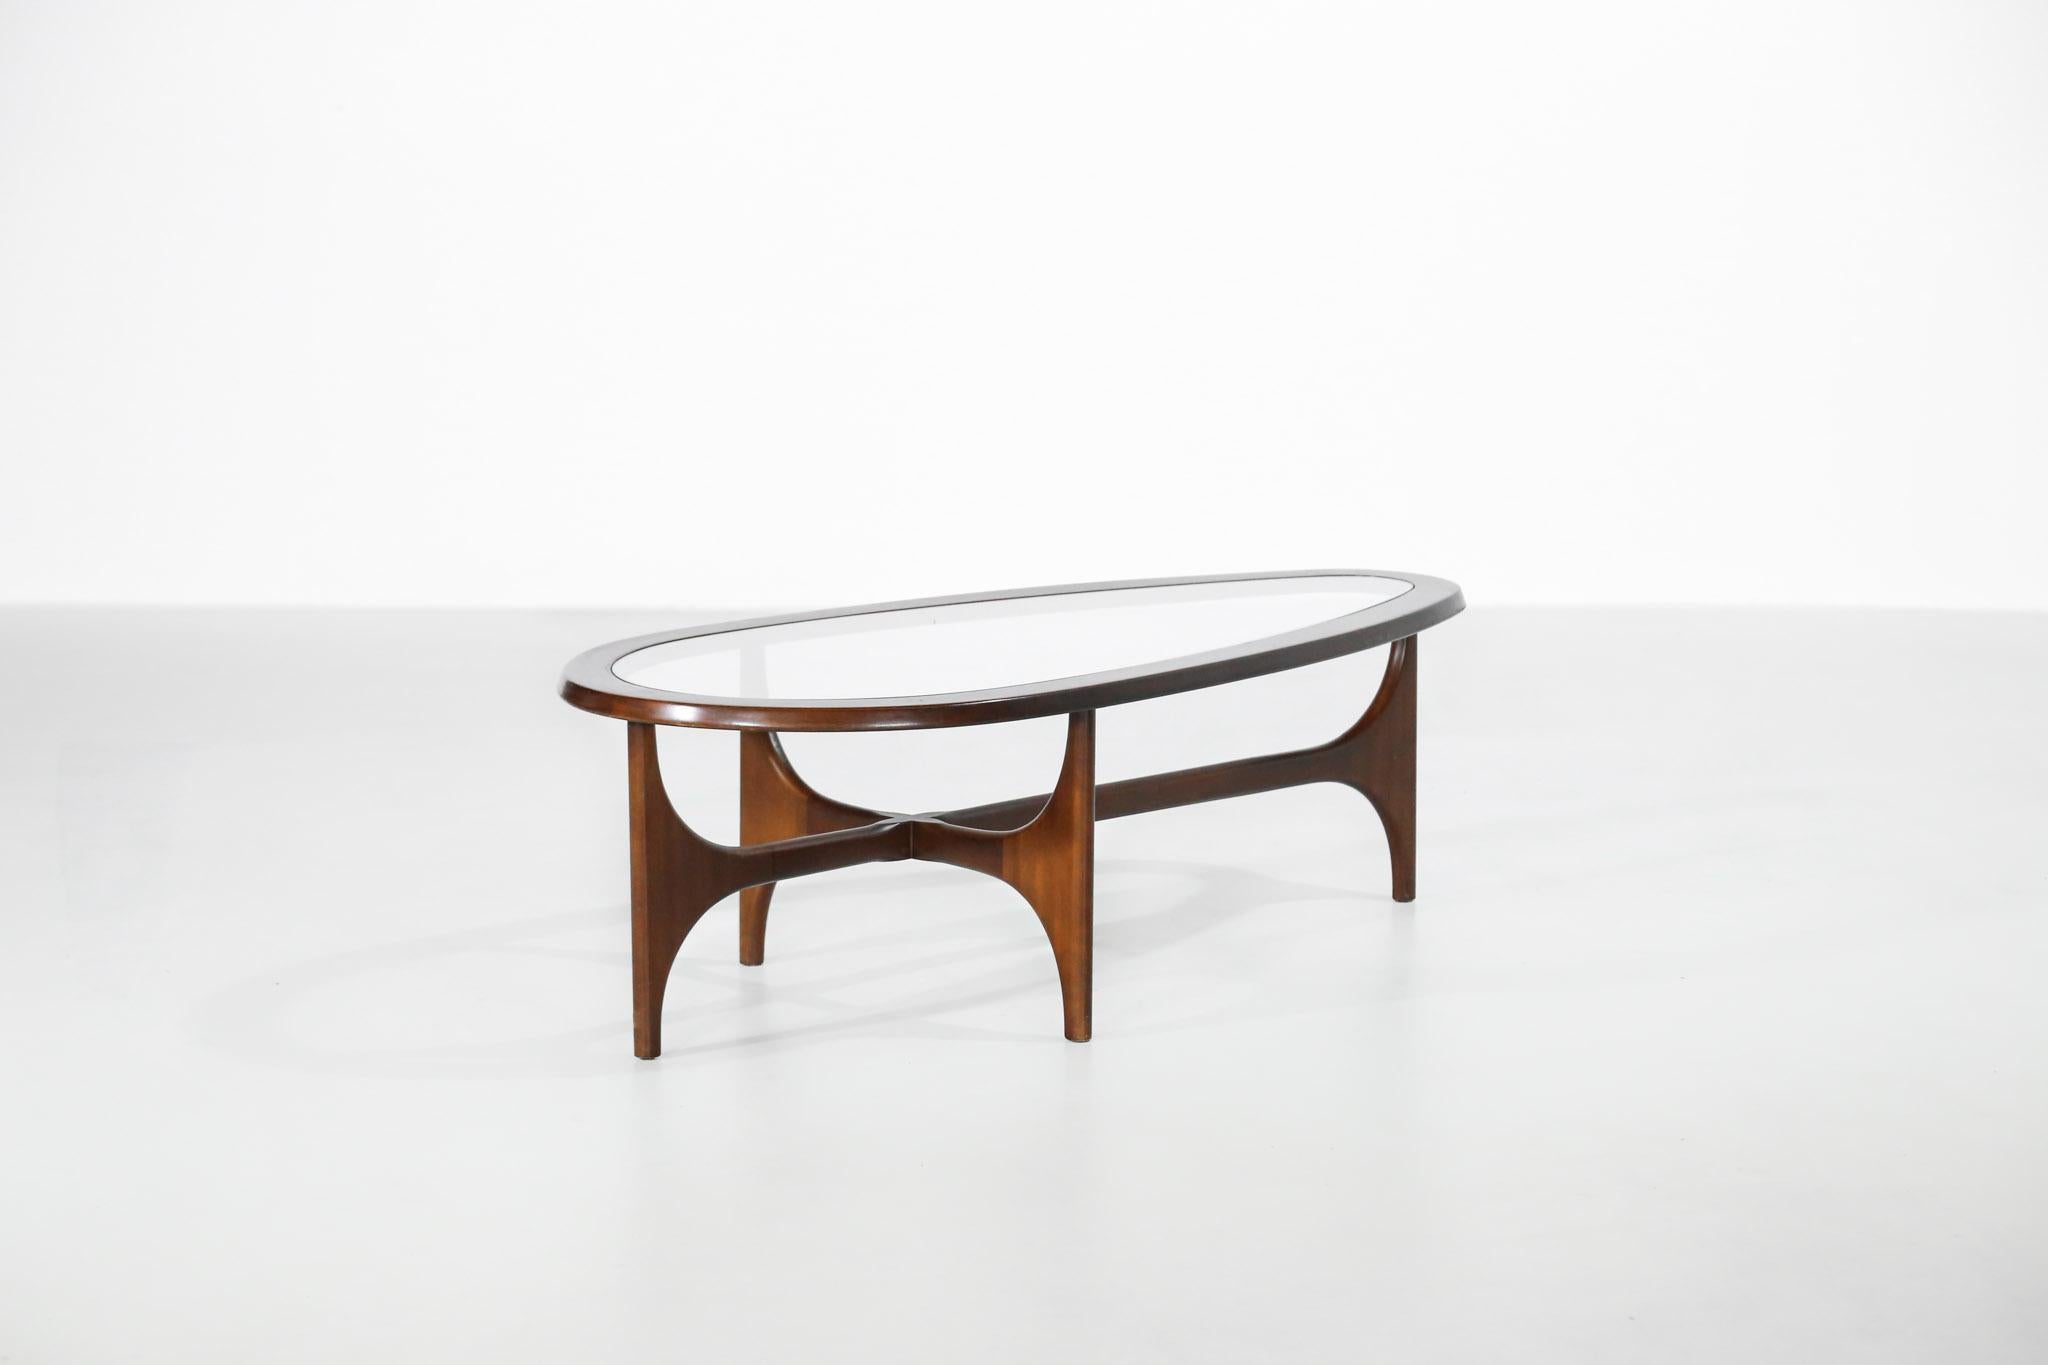 Nice design for this coffee table made of wood and glass.
Stateroom by Stonehill stamp.